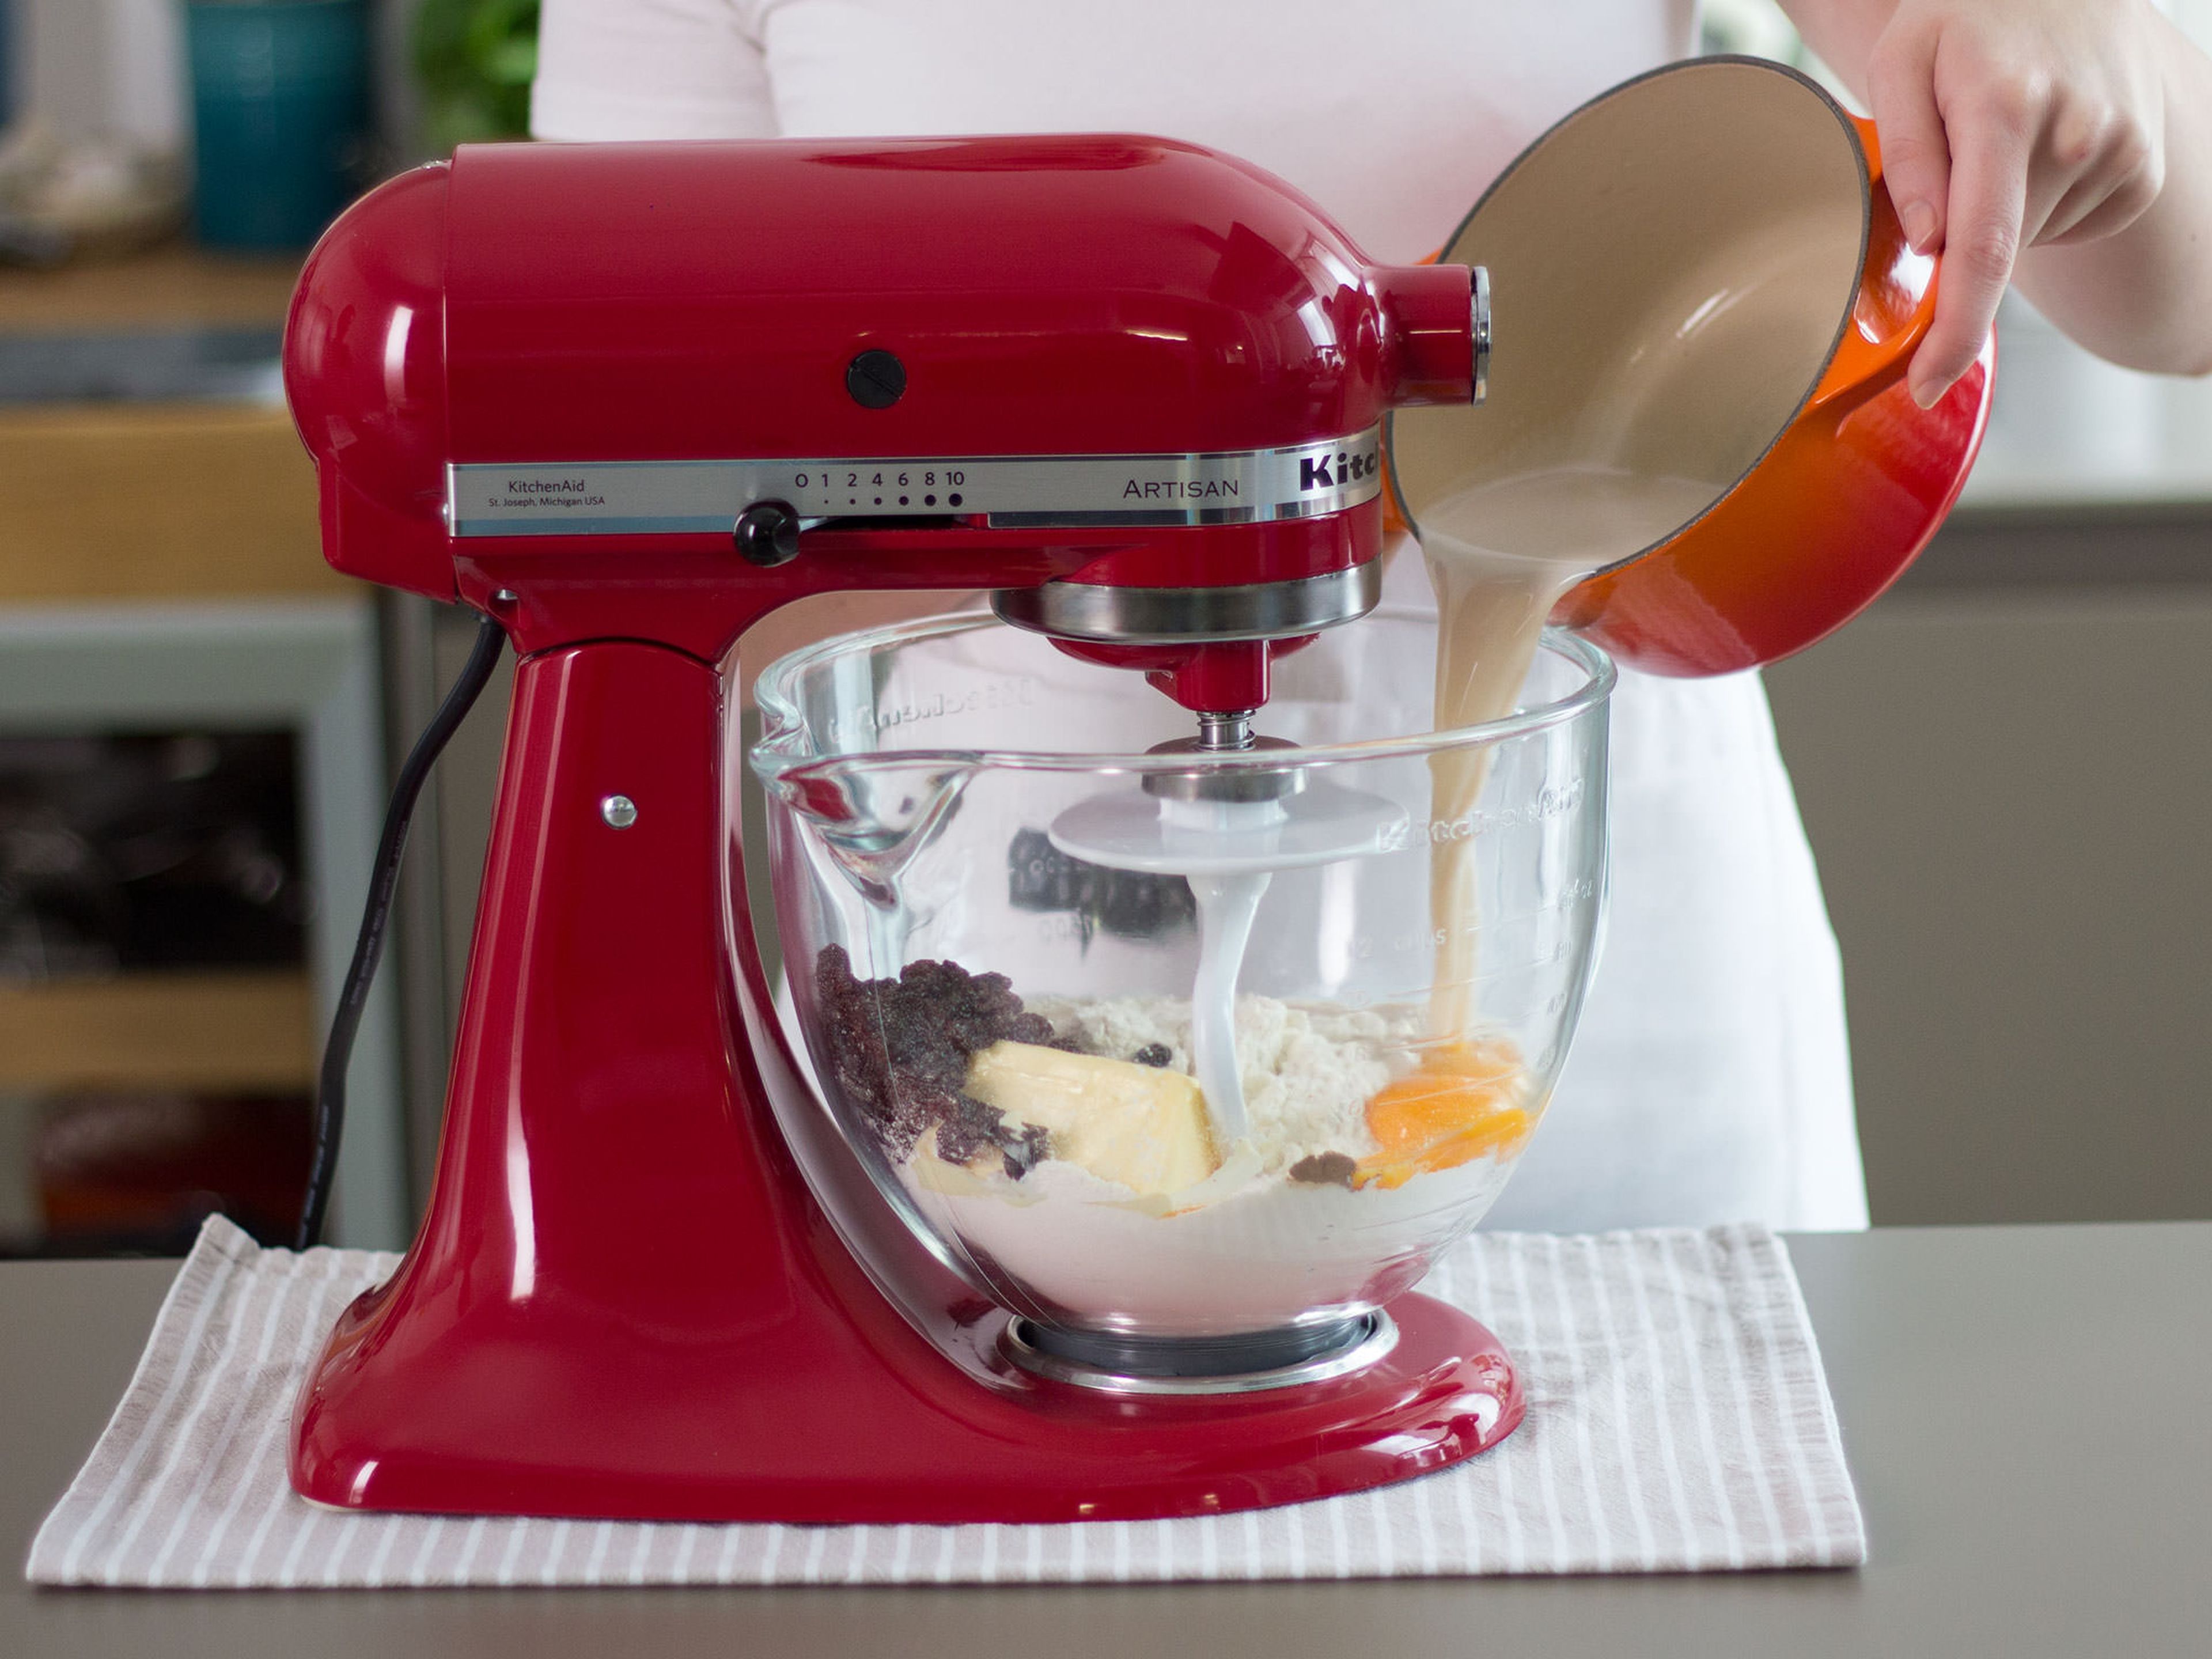 In a stand mixer, beat together some of the flour, butter, raisins, egg yolks, cinnamon, and milk mixture for approx. 3 – 5 min. Cover and allow to rest in a warm place for approx. 30 – 35 min.